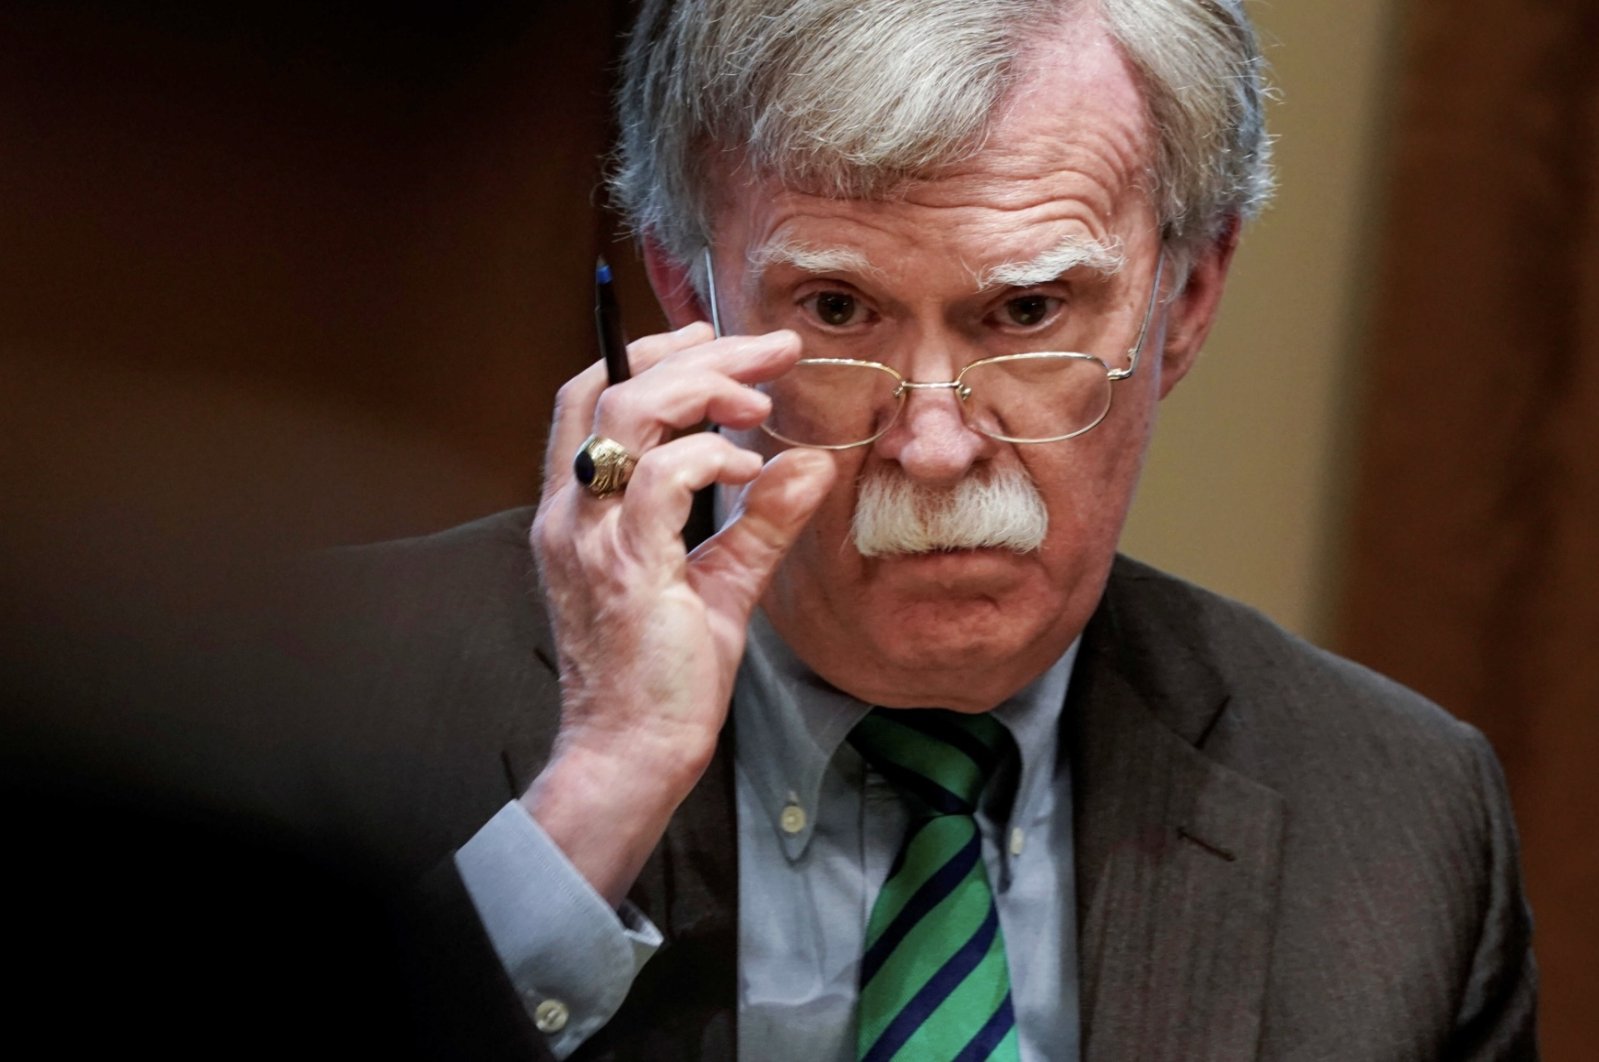 Former U.S. national security adviser John Bolton adjusts his glasses during an Oval Office meeting at the White House in Washington, April 2, 2019. (Reuters File Photo)